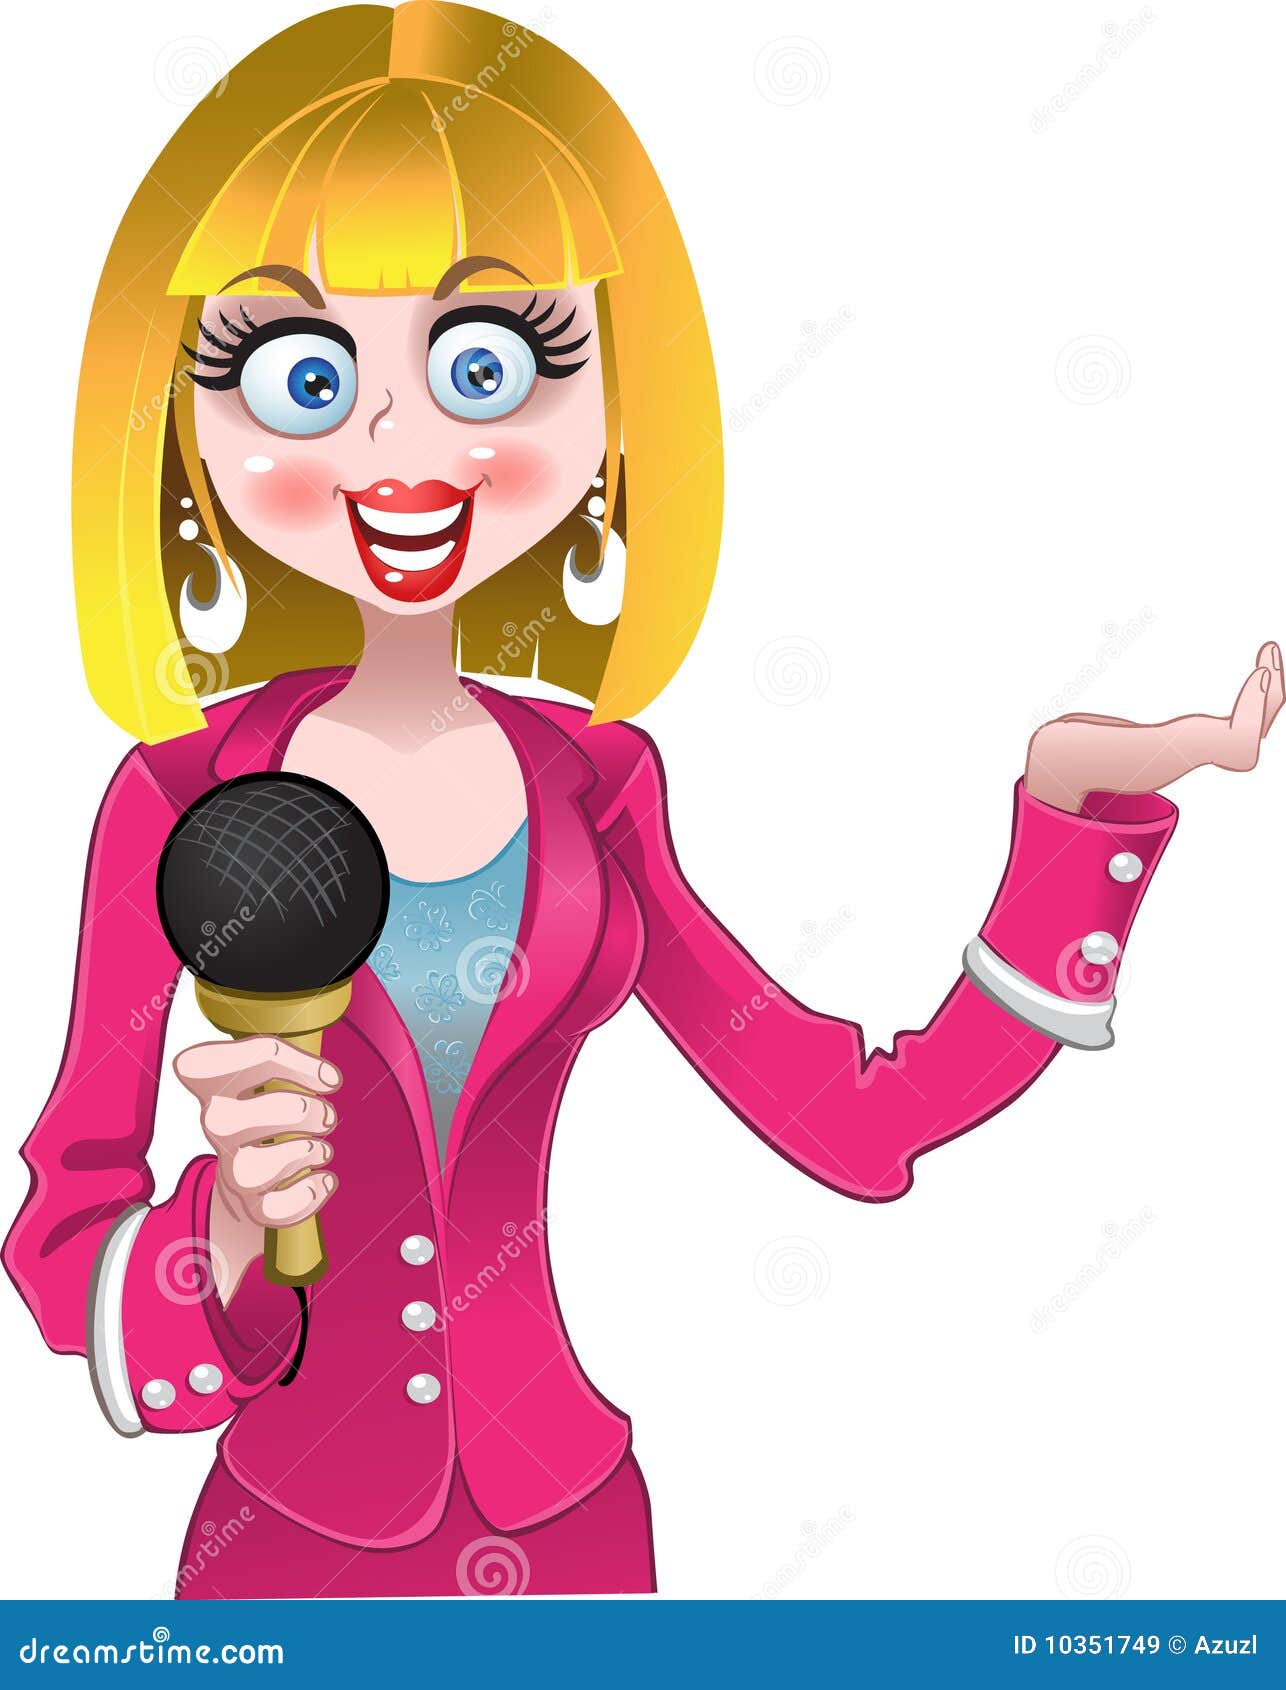 Reporter girl stock vector. Image of person, illustration - 10351749